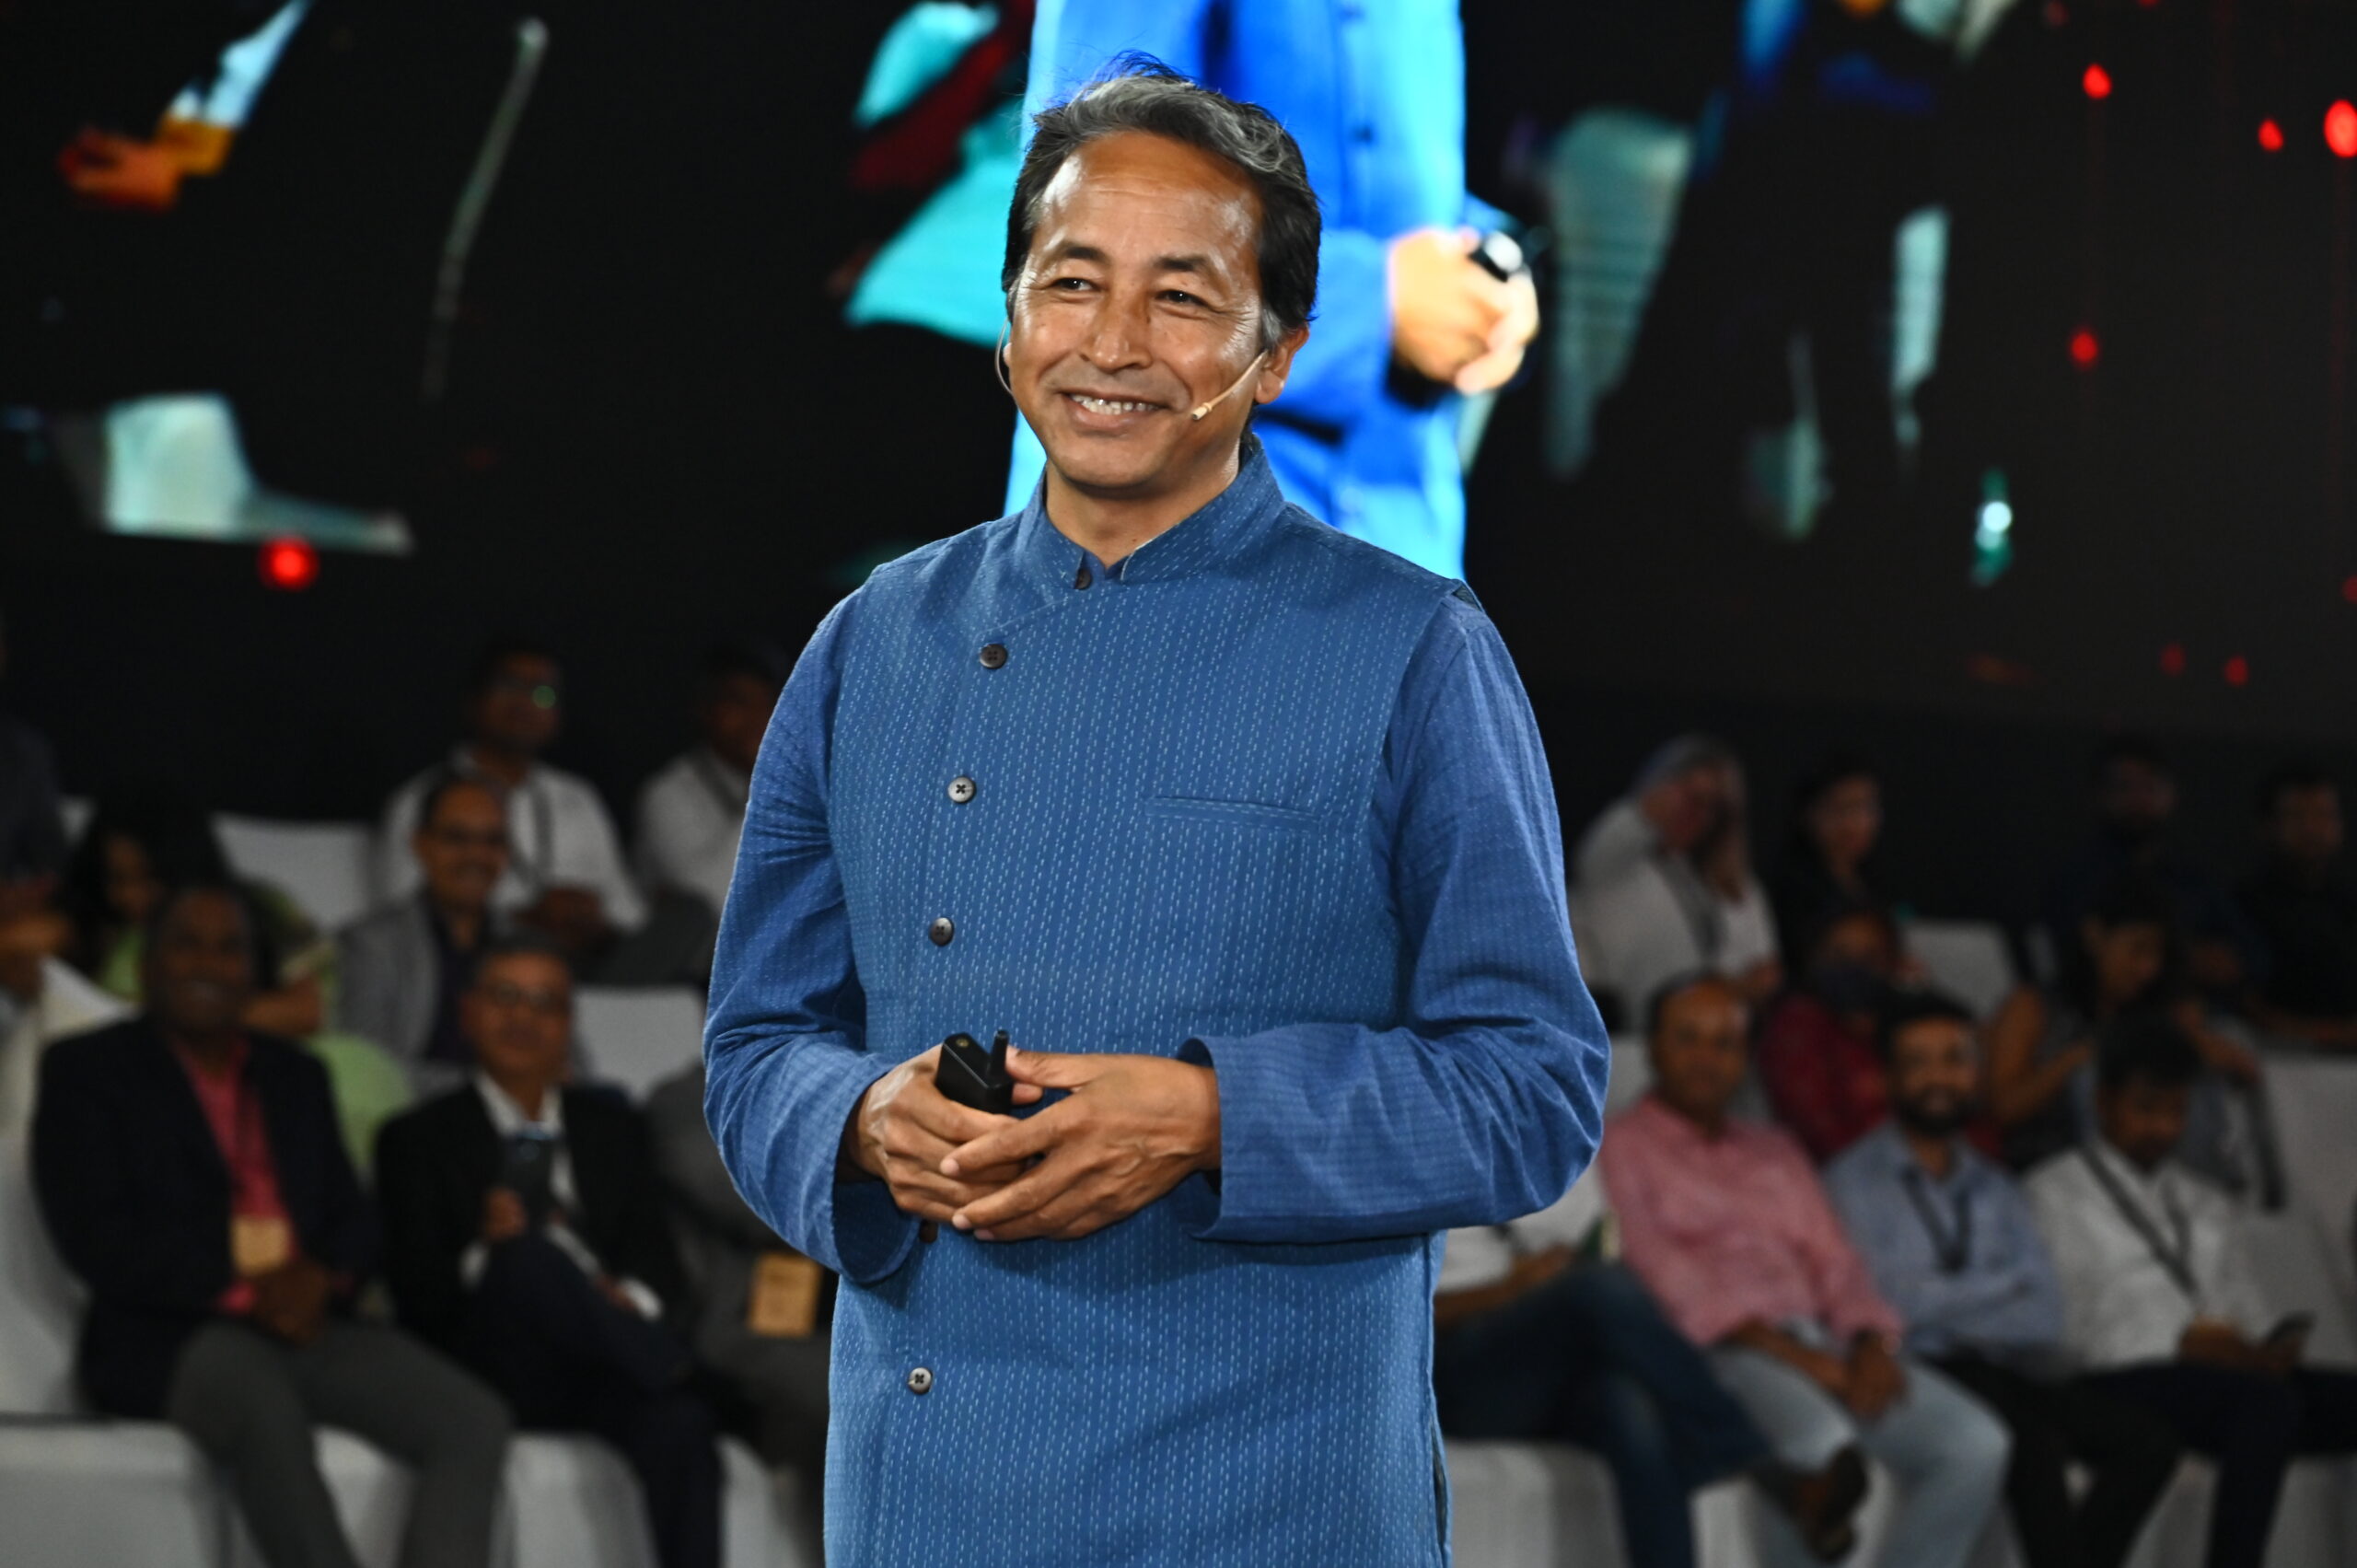 Sonam Wangchuk as a guest speaker at a corporate event in Goa